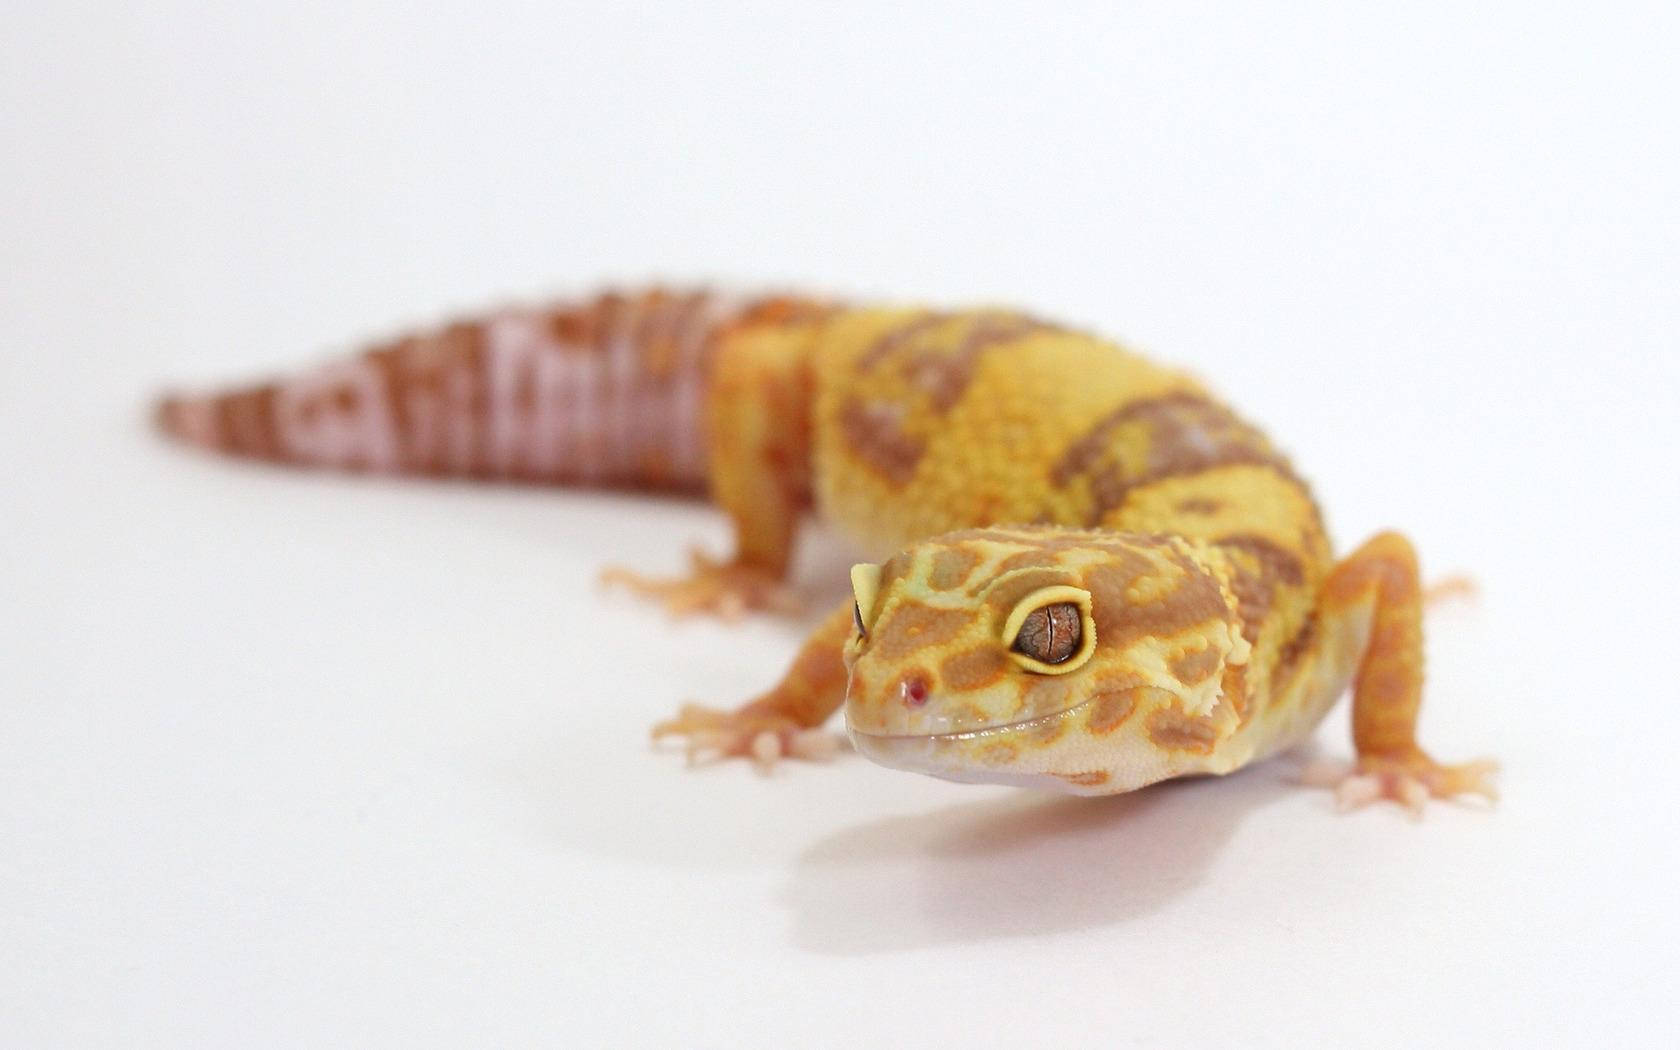 An Orange Leopard Gecko Poses For A Picture Wallpaper